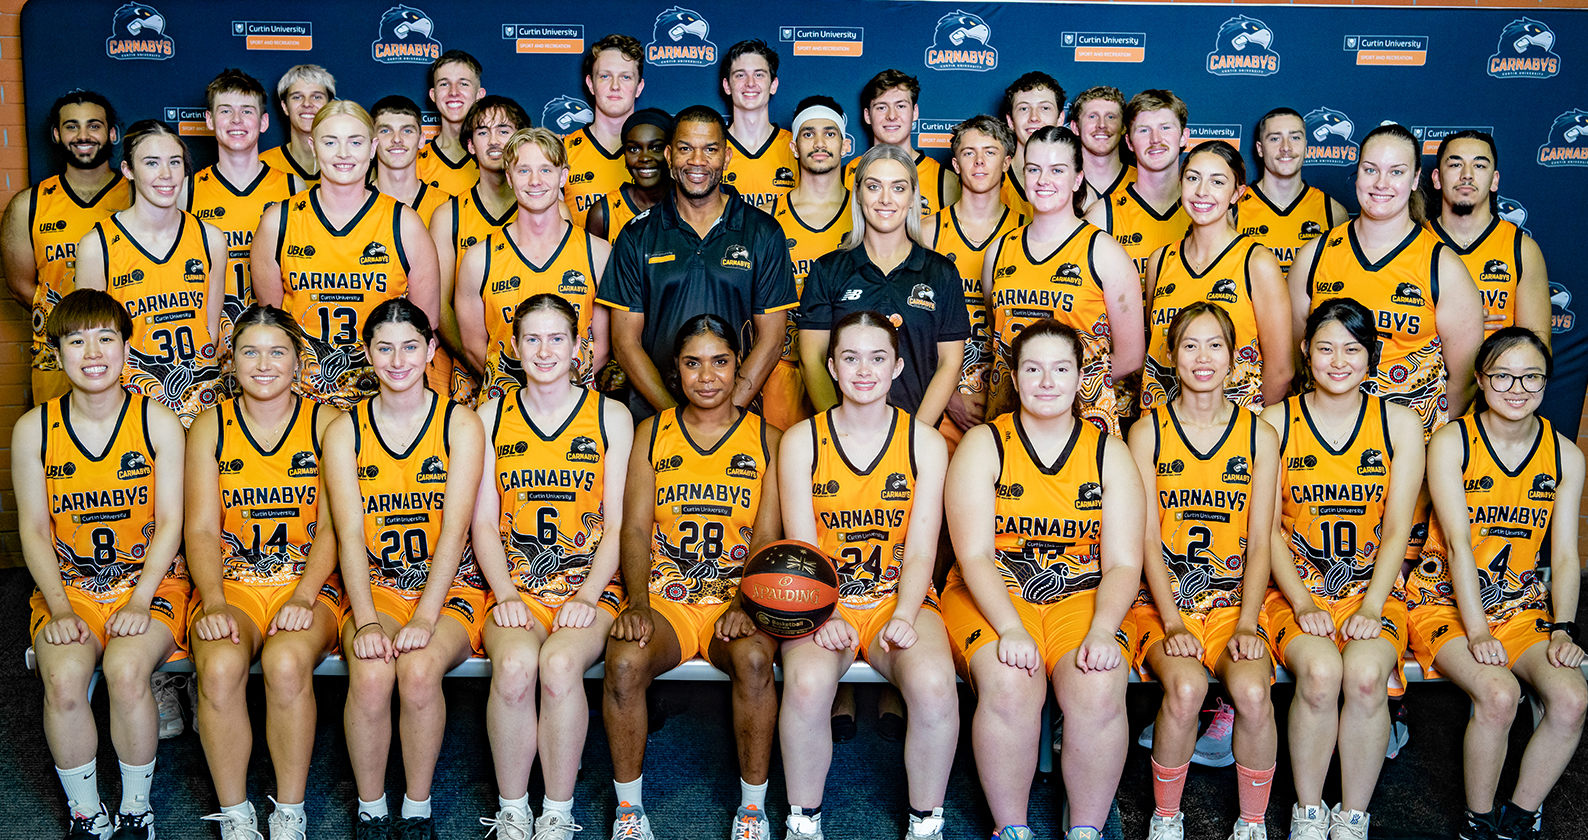 University Basketball League Curtin Carnby Men and Women's Squads with coaches in centre. Group photo orange in uniform.